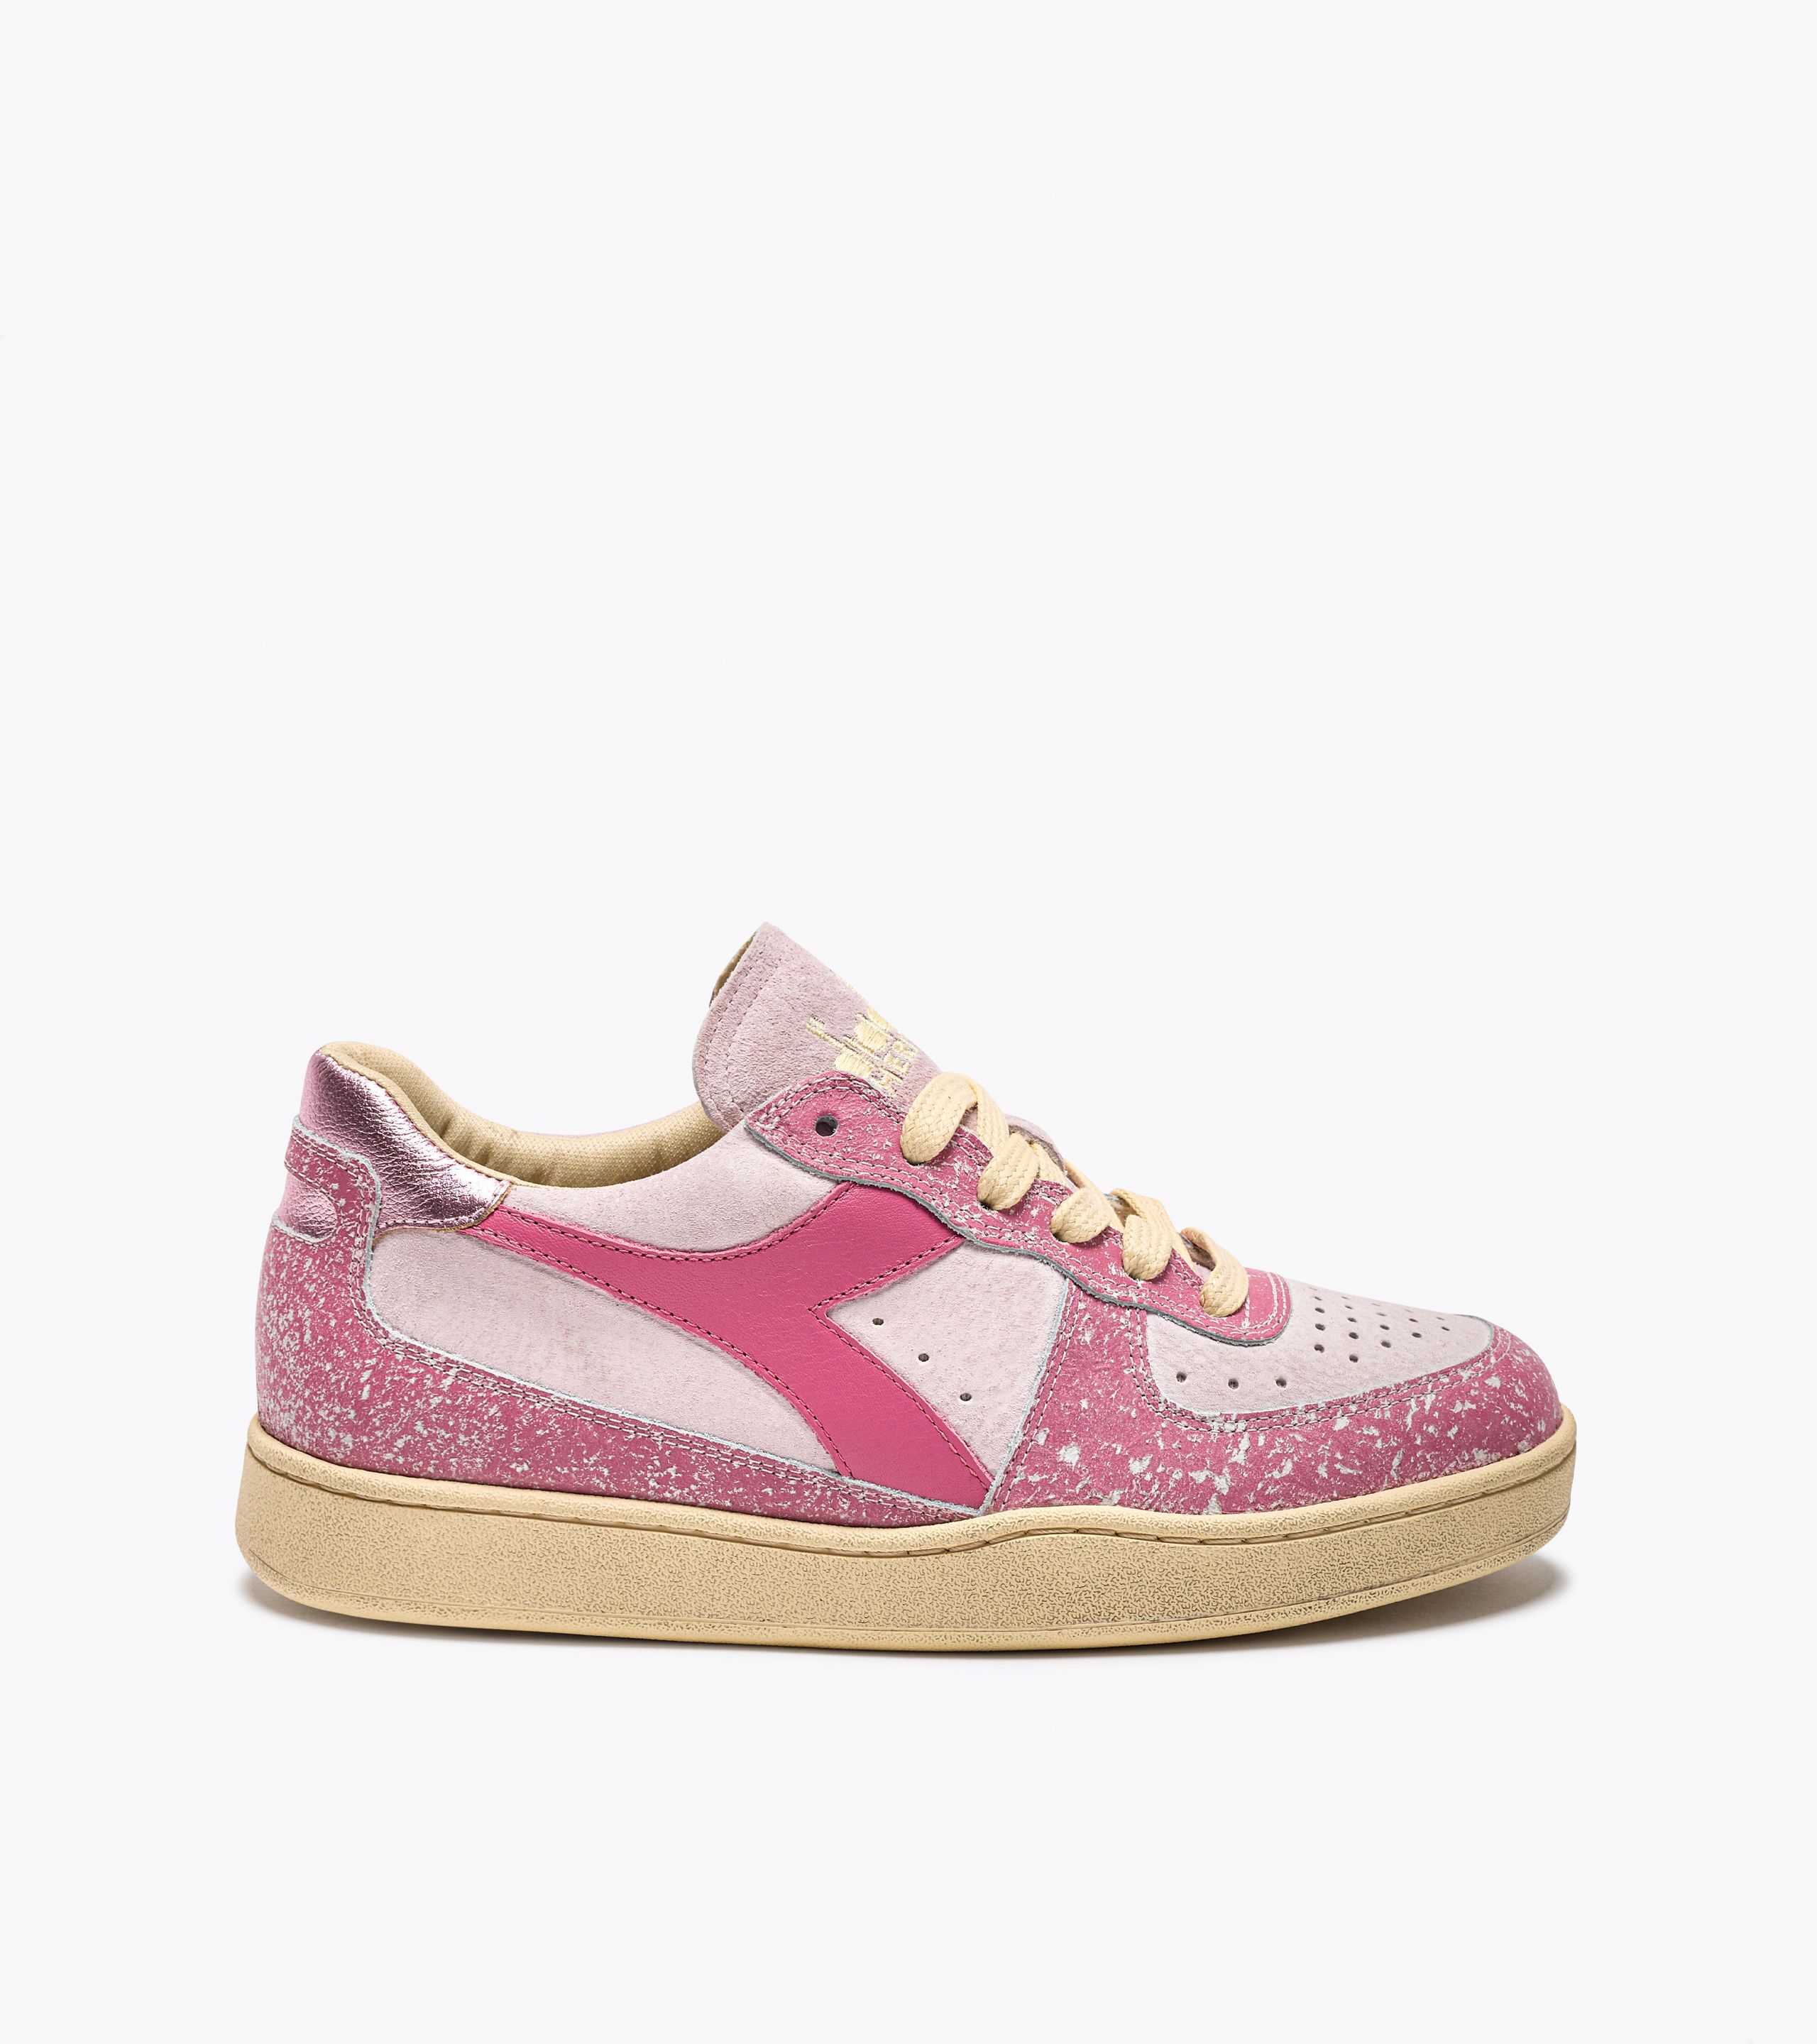 Diadora Women's low sneakers: for sale at 39.99€ on Mecshopping.it